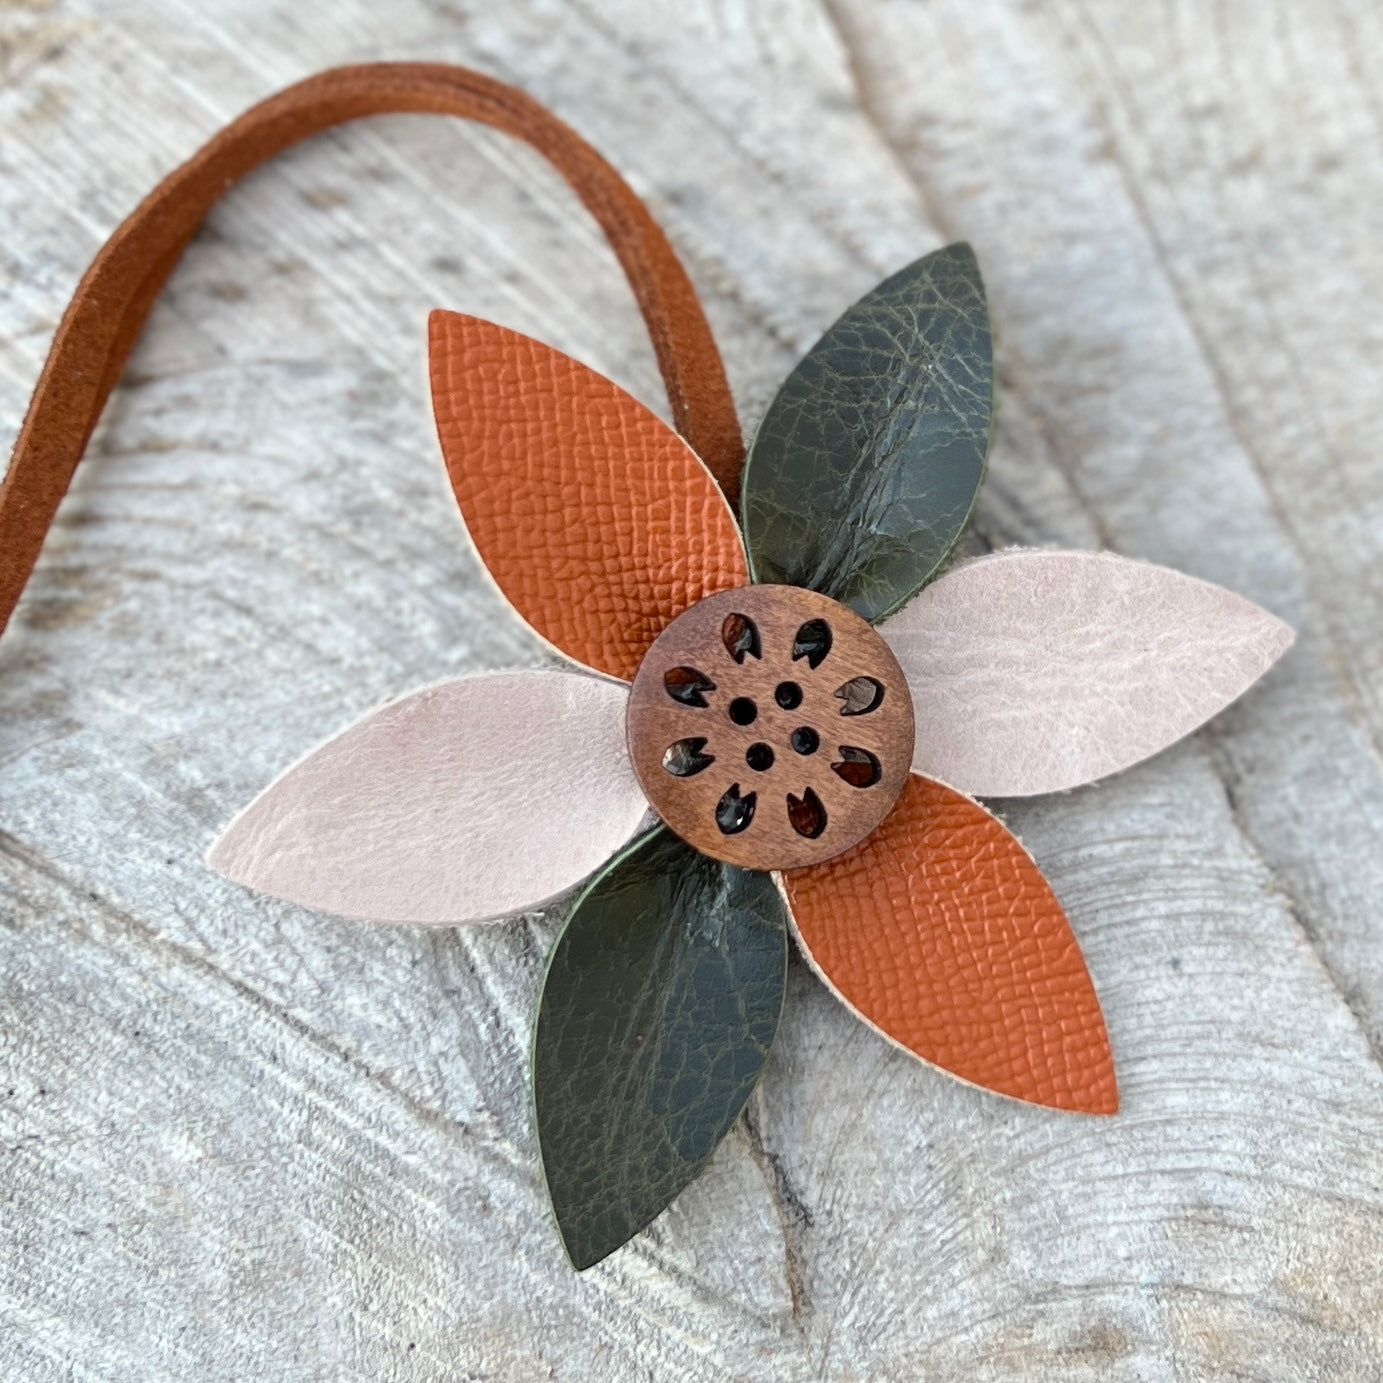 Leather Flower Bag Charm with Tote Loop in Spring Neutrals